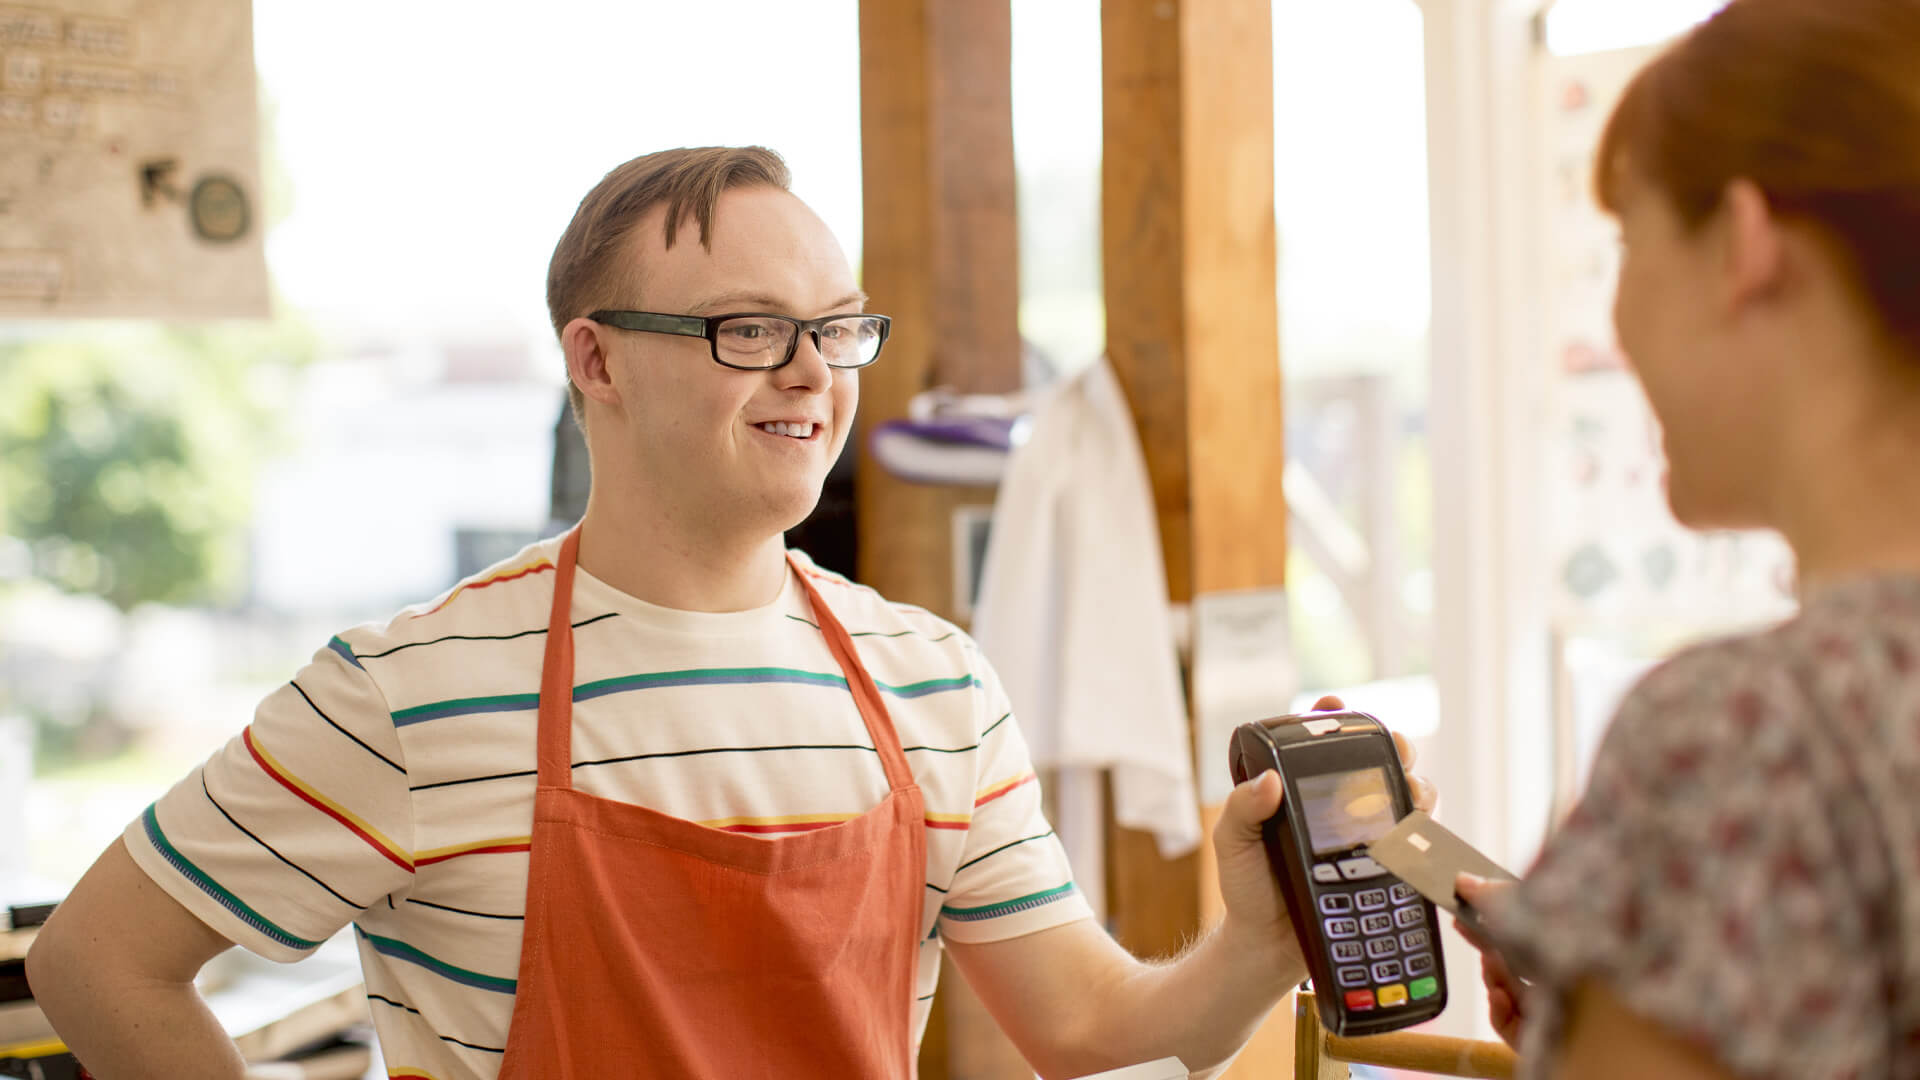 Young man working in shop shows customer payment device